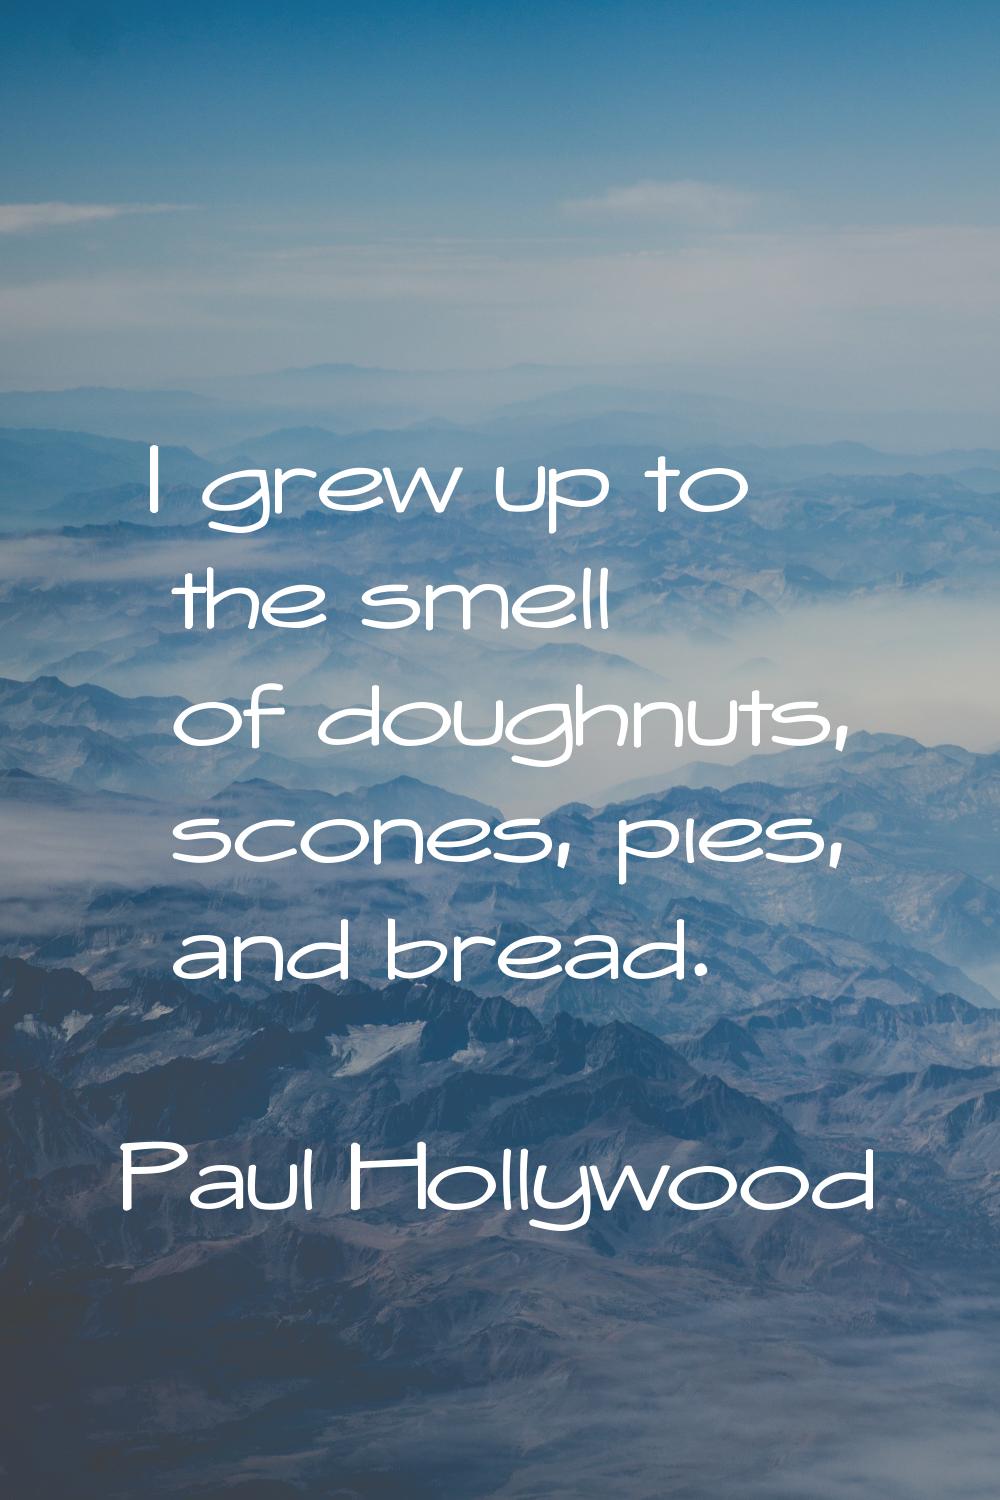 I grew up to the smell of doughnuts, scones, pies, and bread.